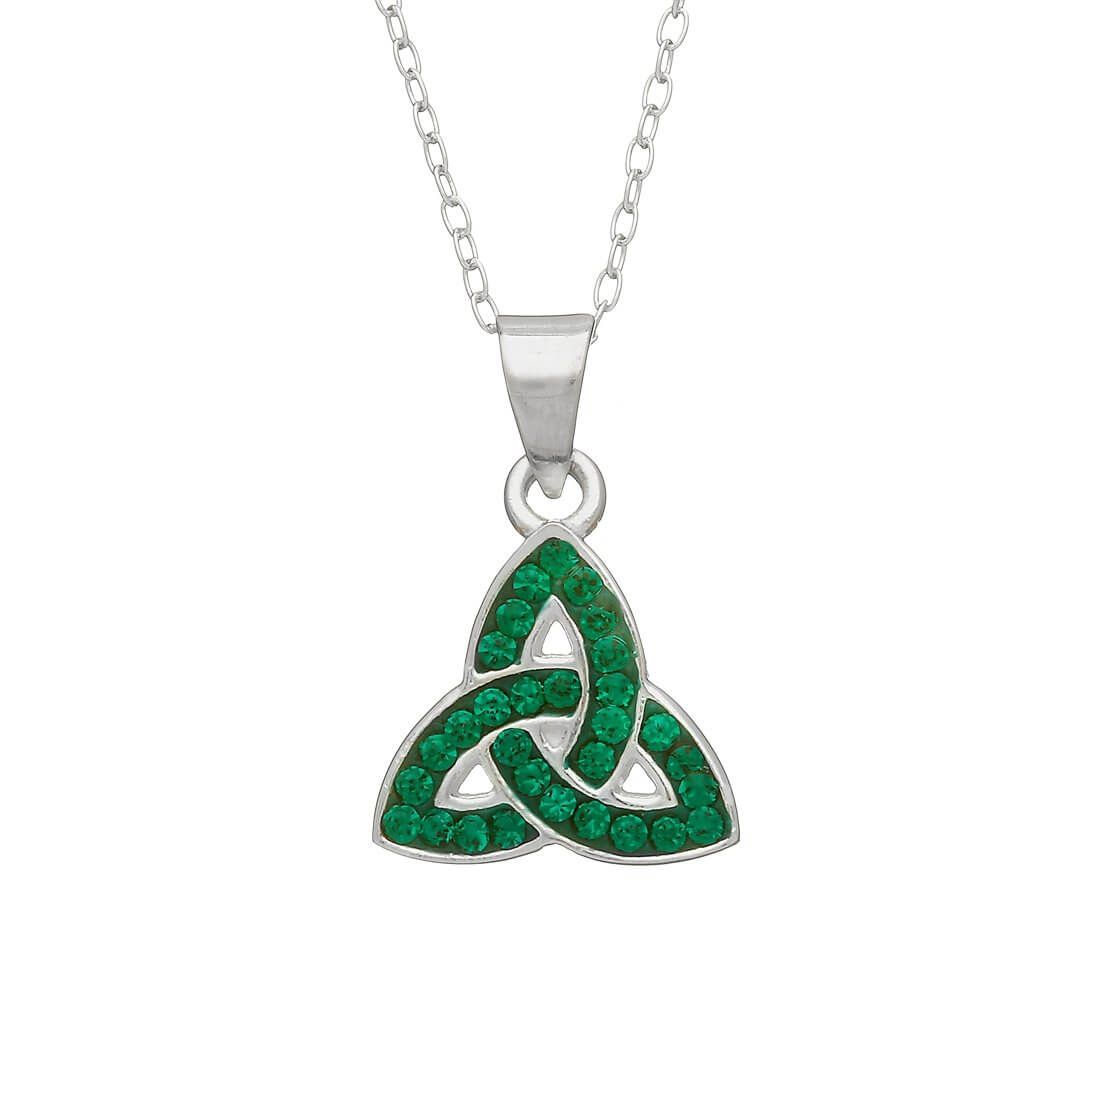 Ladies Sterling Silver Trinity Pendant with Green CZ Stones